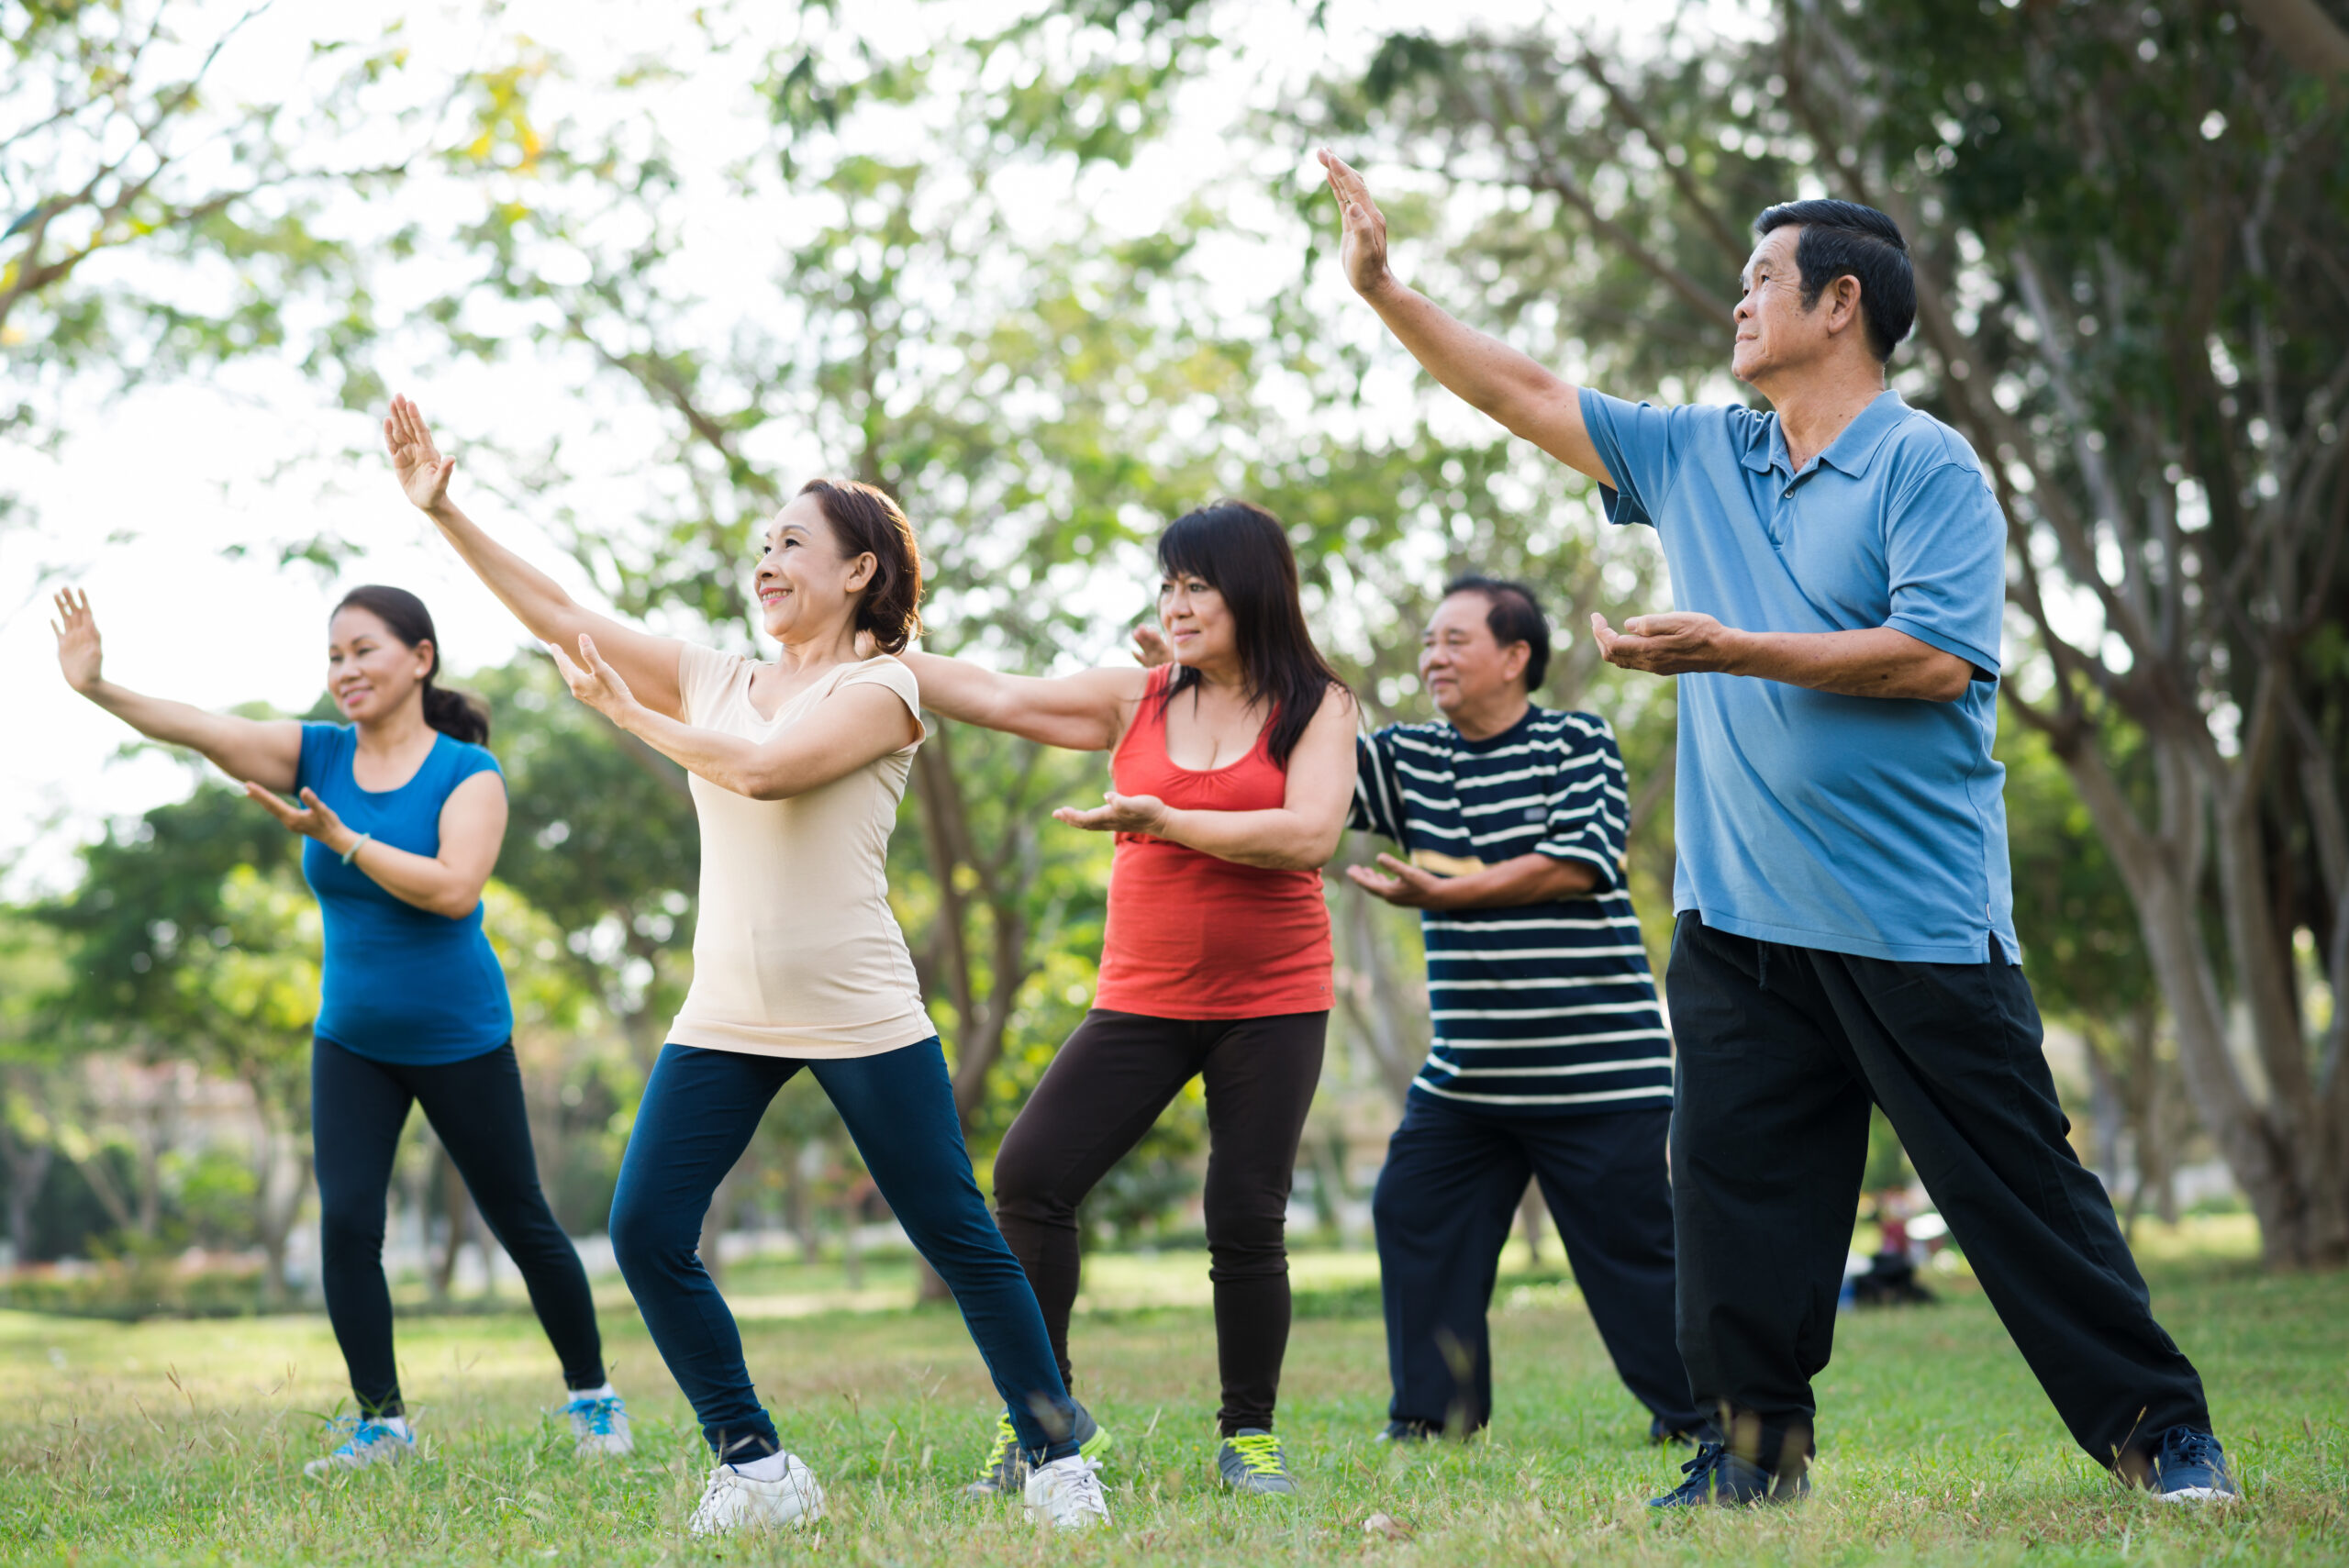 Finding Your Flow State: Practicing Tai Chi and Yoga to Promote